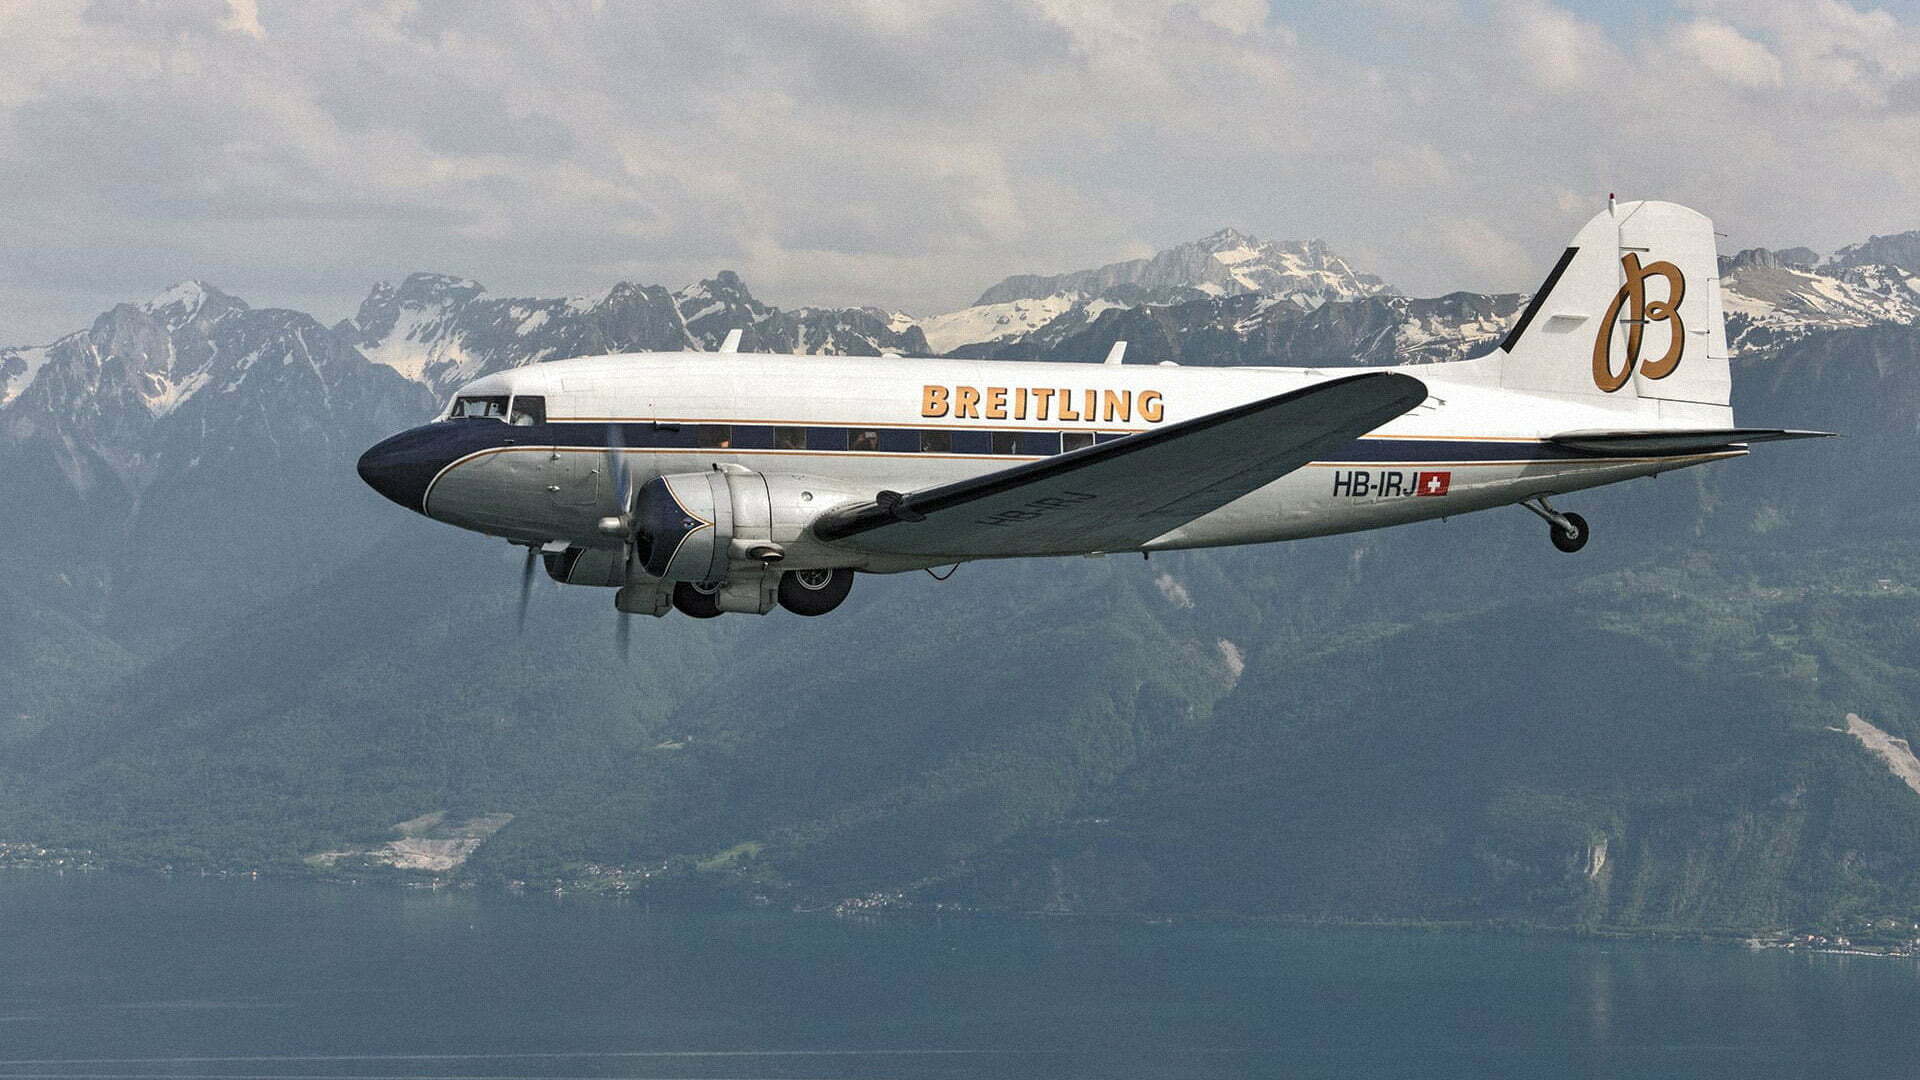 Breitling-DC3_TheGridAsia_Cover-Picture.jpg